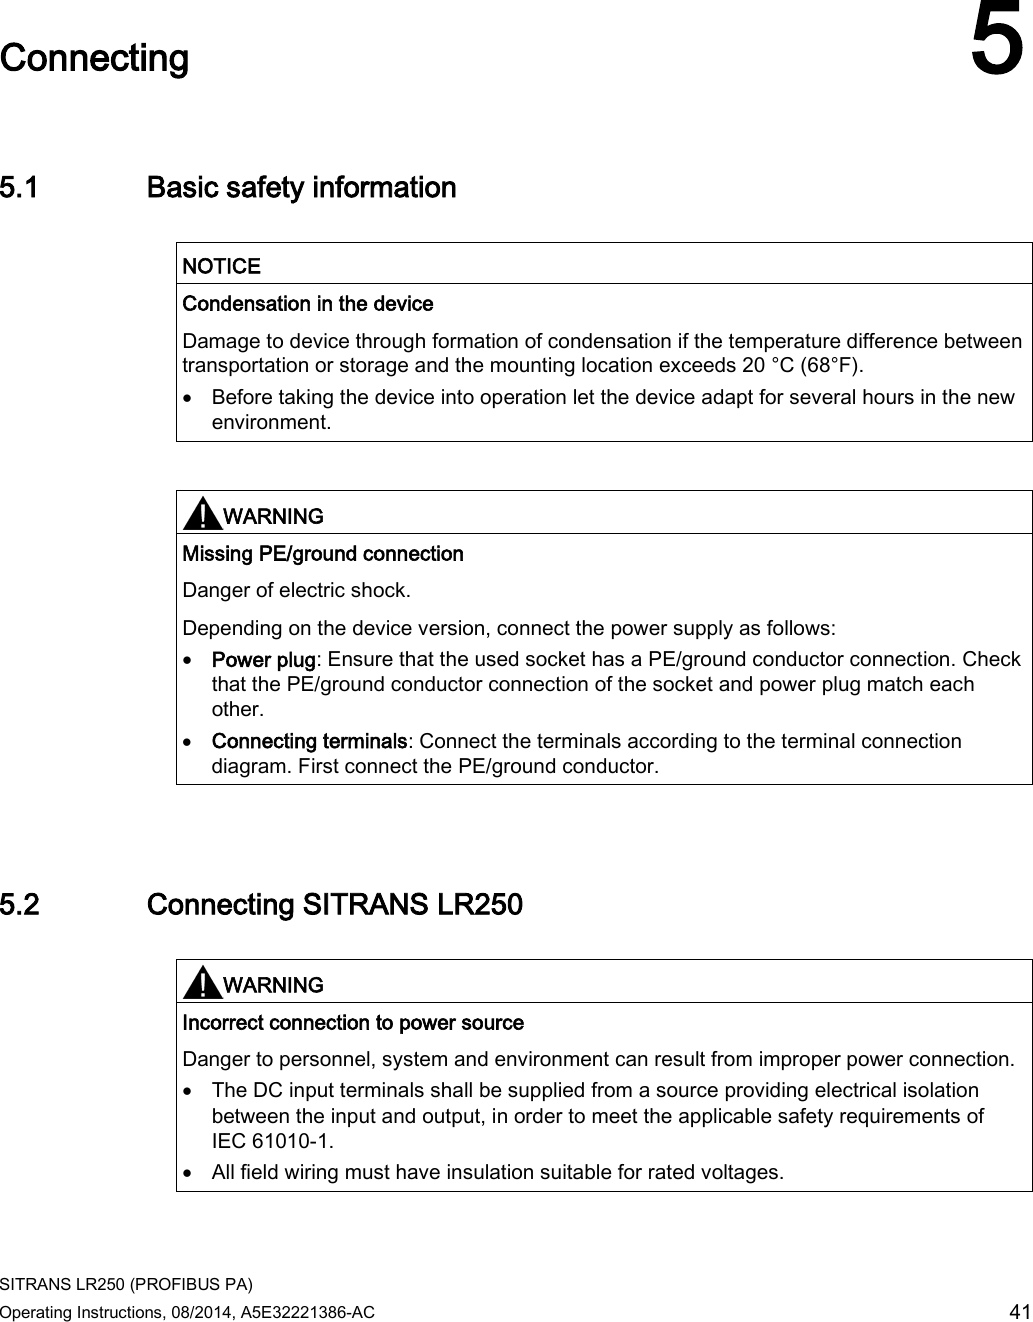  SITRANS LR250 (PROFIBUS PA) Operating Instructions, 08/2014, A5E32221386-AC 41  Connecting 5 5.1 Basic safety information   NOTICE Condensation in the device Damage to device through formation of condensation if the temperature difference between transportation or storage and the mounting location exceeds 20 °C (68°F). • Before taking the device into operation let the device adapt for several hours in the new environment.    WARNING Missing PE/ground connection Danger of electric shock. Depending on the device version, connect the power supply as follows: • Power plug: Ensure that the used socket has a PE/ground conductor connection. Check that the PE/ground conductor connection of the socket and power plug match each other. • Connecting terminals: Connect the terminals according to the terminal connection diagram. First connect the PE/ground conductor.  5.2 Connecting SITRANS LR250   WARNING Incorrect connection to power source Danger to personnel, system and environment can result from improper power connection. • The DC input terminals shall be supplied from a source providing electrical isolation between the input and output, in order to meet the applicable safety requirements of IEC 61010-1. • All field wiring must have insulation suitable for rated voltages.  